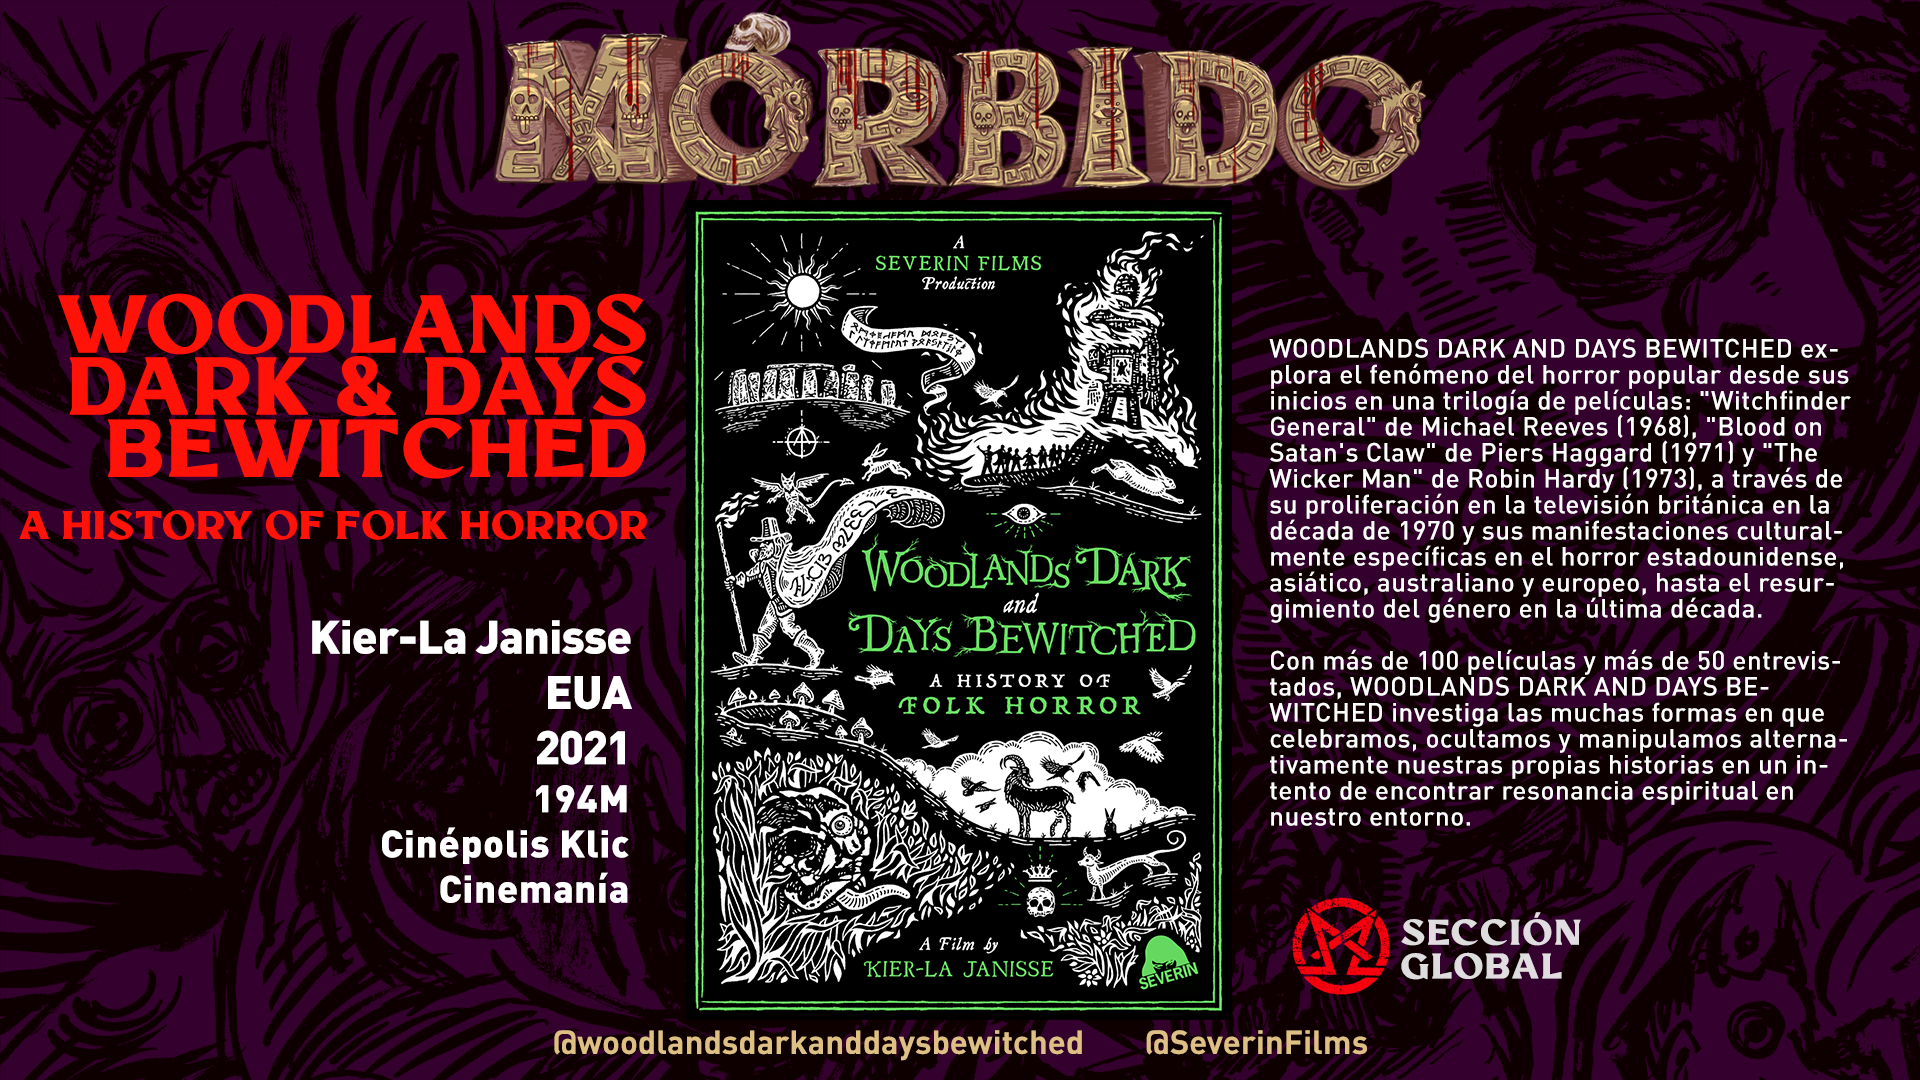 WOODLANDS DARK AND DAYS BEWITCHED AT MORBIDO FILM FESTIVAL - Woodlands Dark  and Days Bewitched